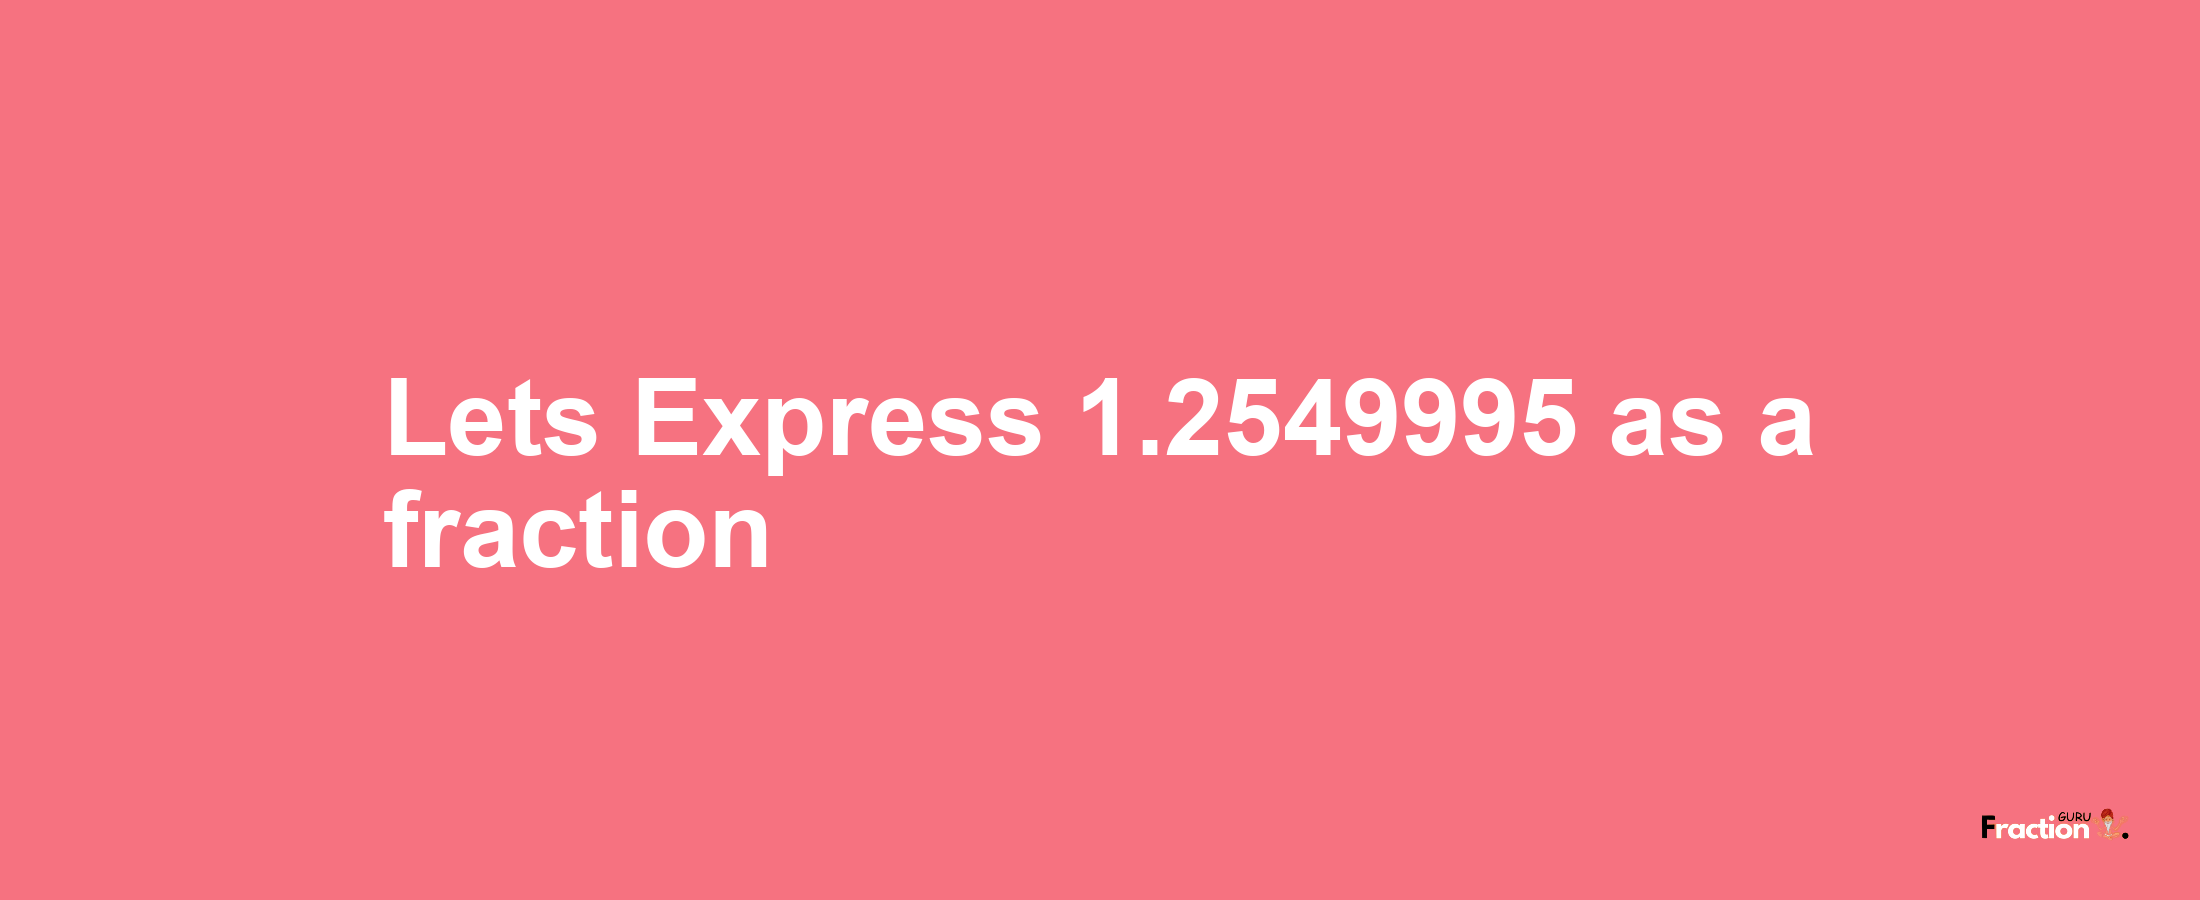 Lets Express 1.2549995 as afraction